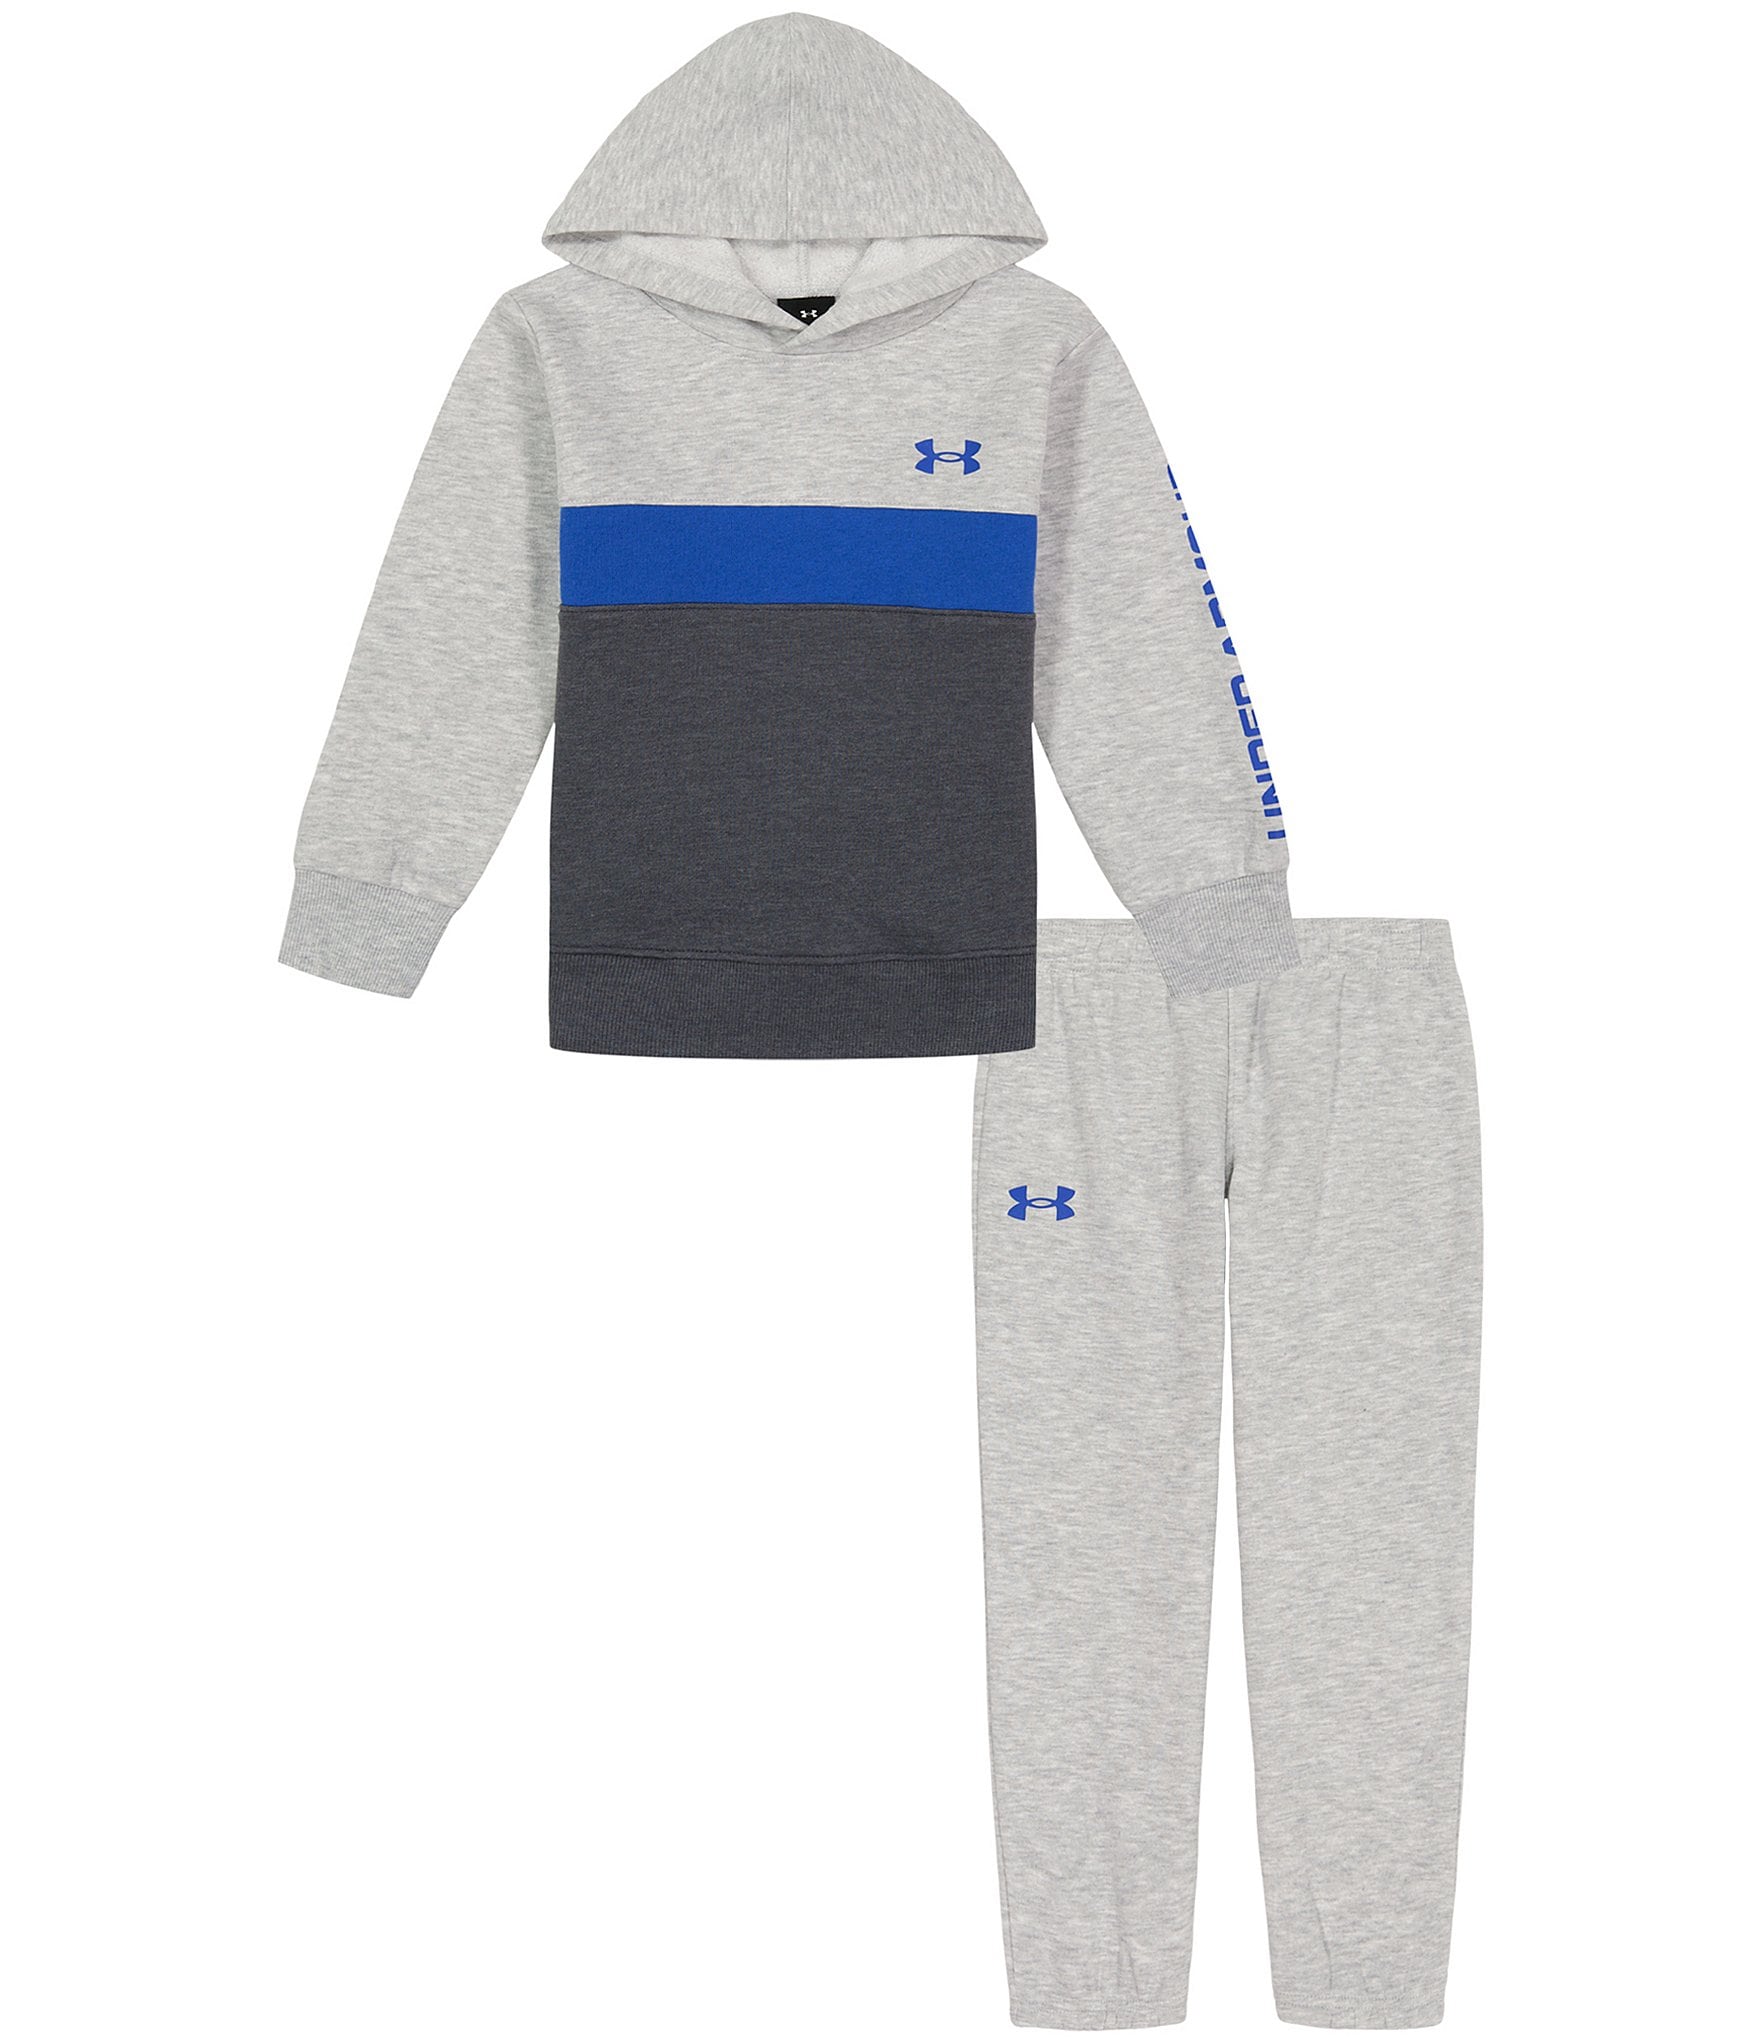 Under Armour Little Boys 2T-7 Long Sleeve Branded Hoodie & Jogger Pants ...